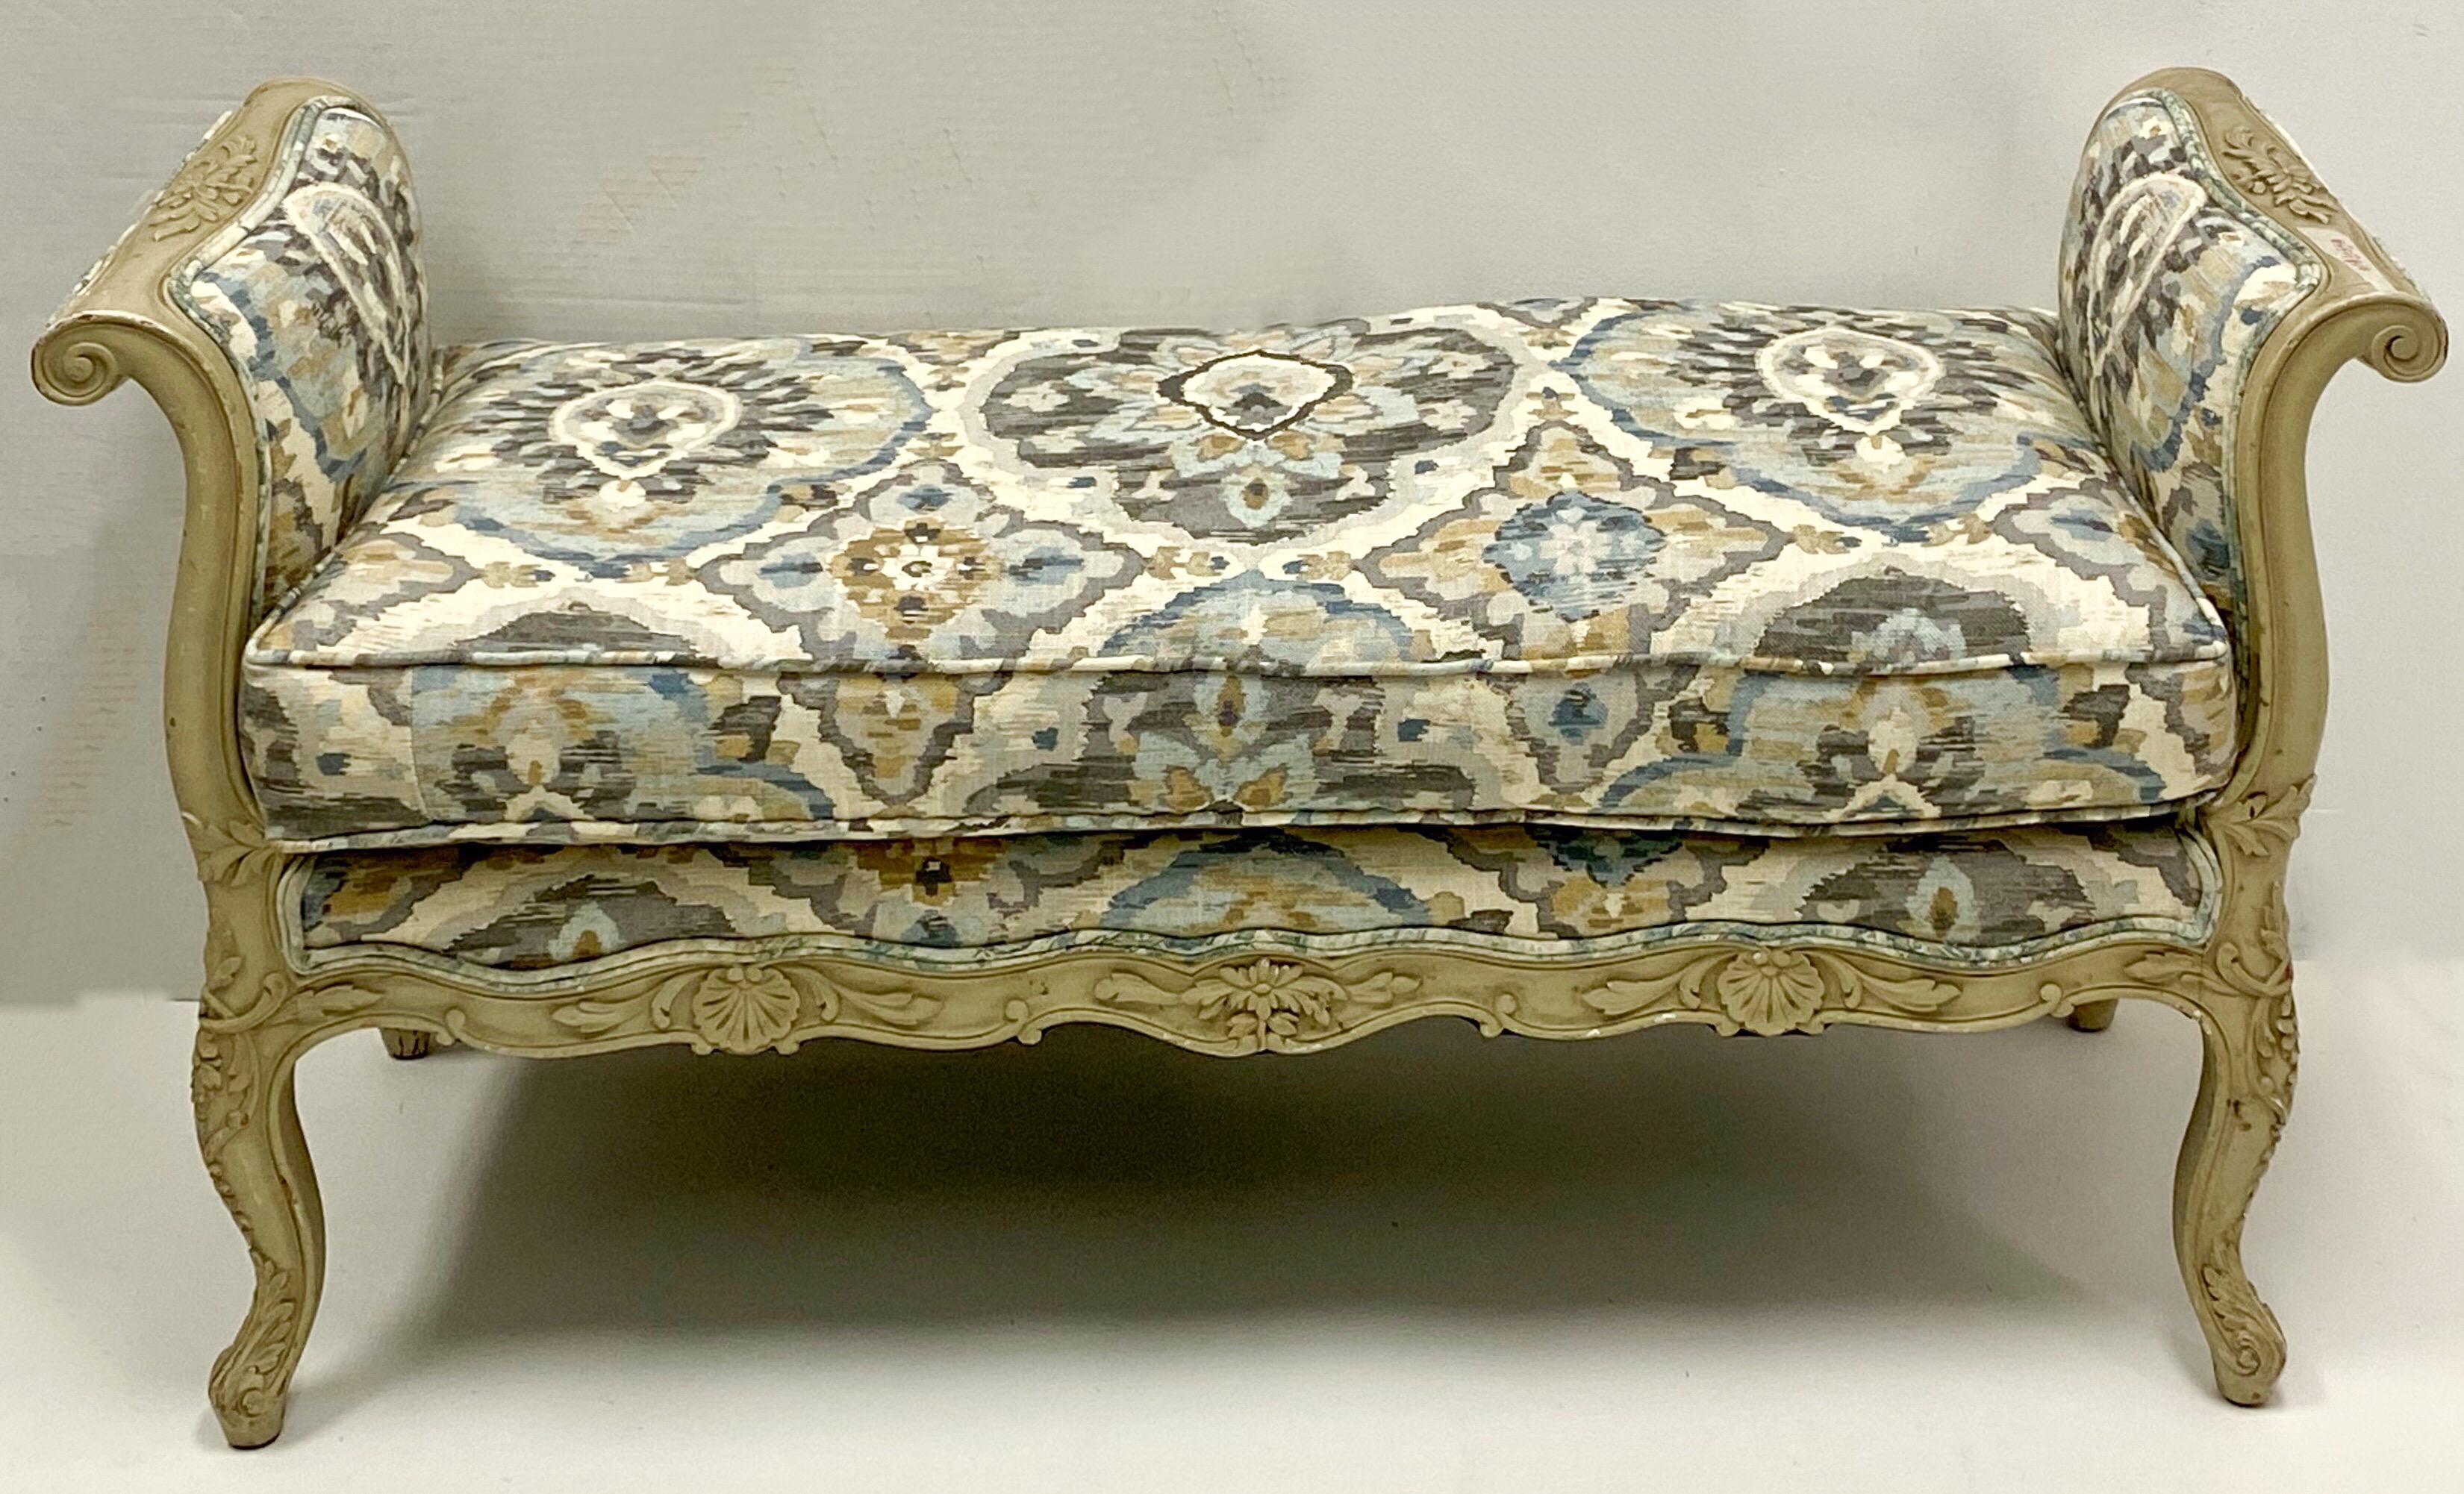 This is a good looking carved and painted French style bench. It is unmarked with a thick down cushion. The linen fabric appears to be a recent addition. I believe it dates to the 50s.